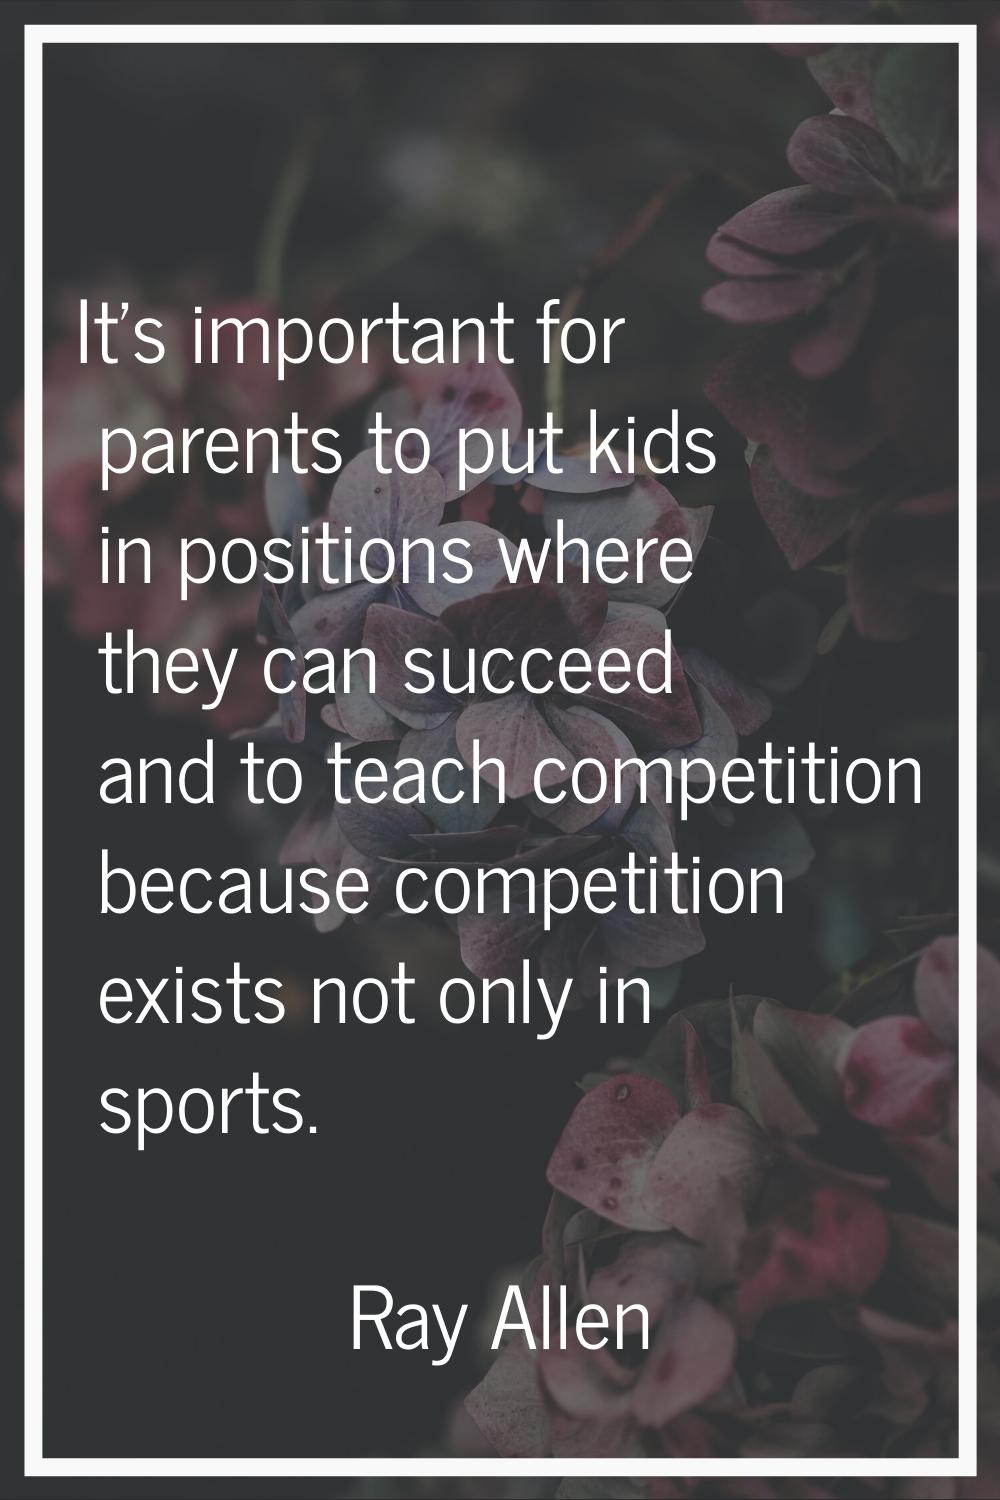 It's important for parents to put kids in positions where they can succeed and to teach competition